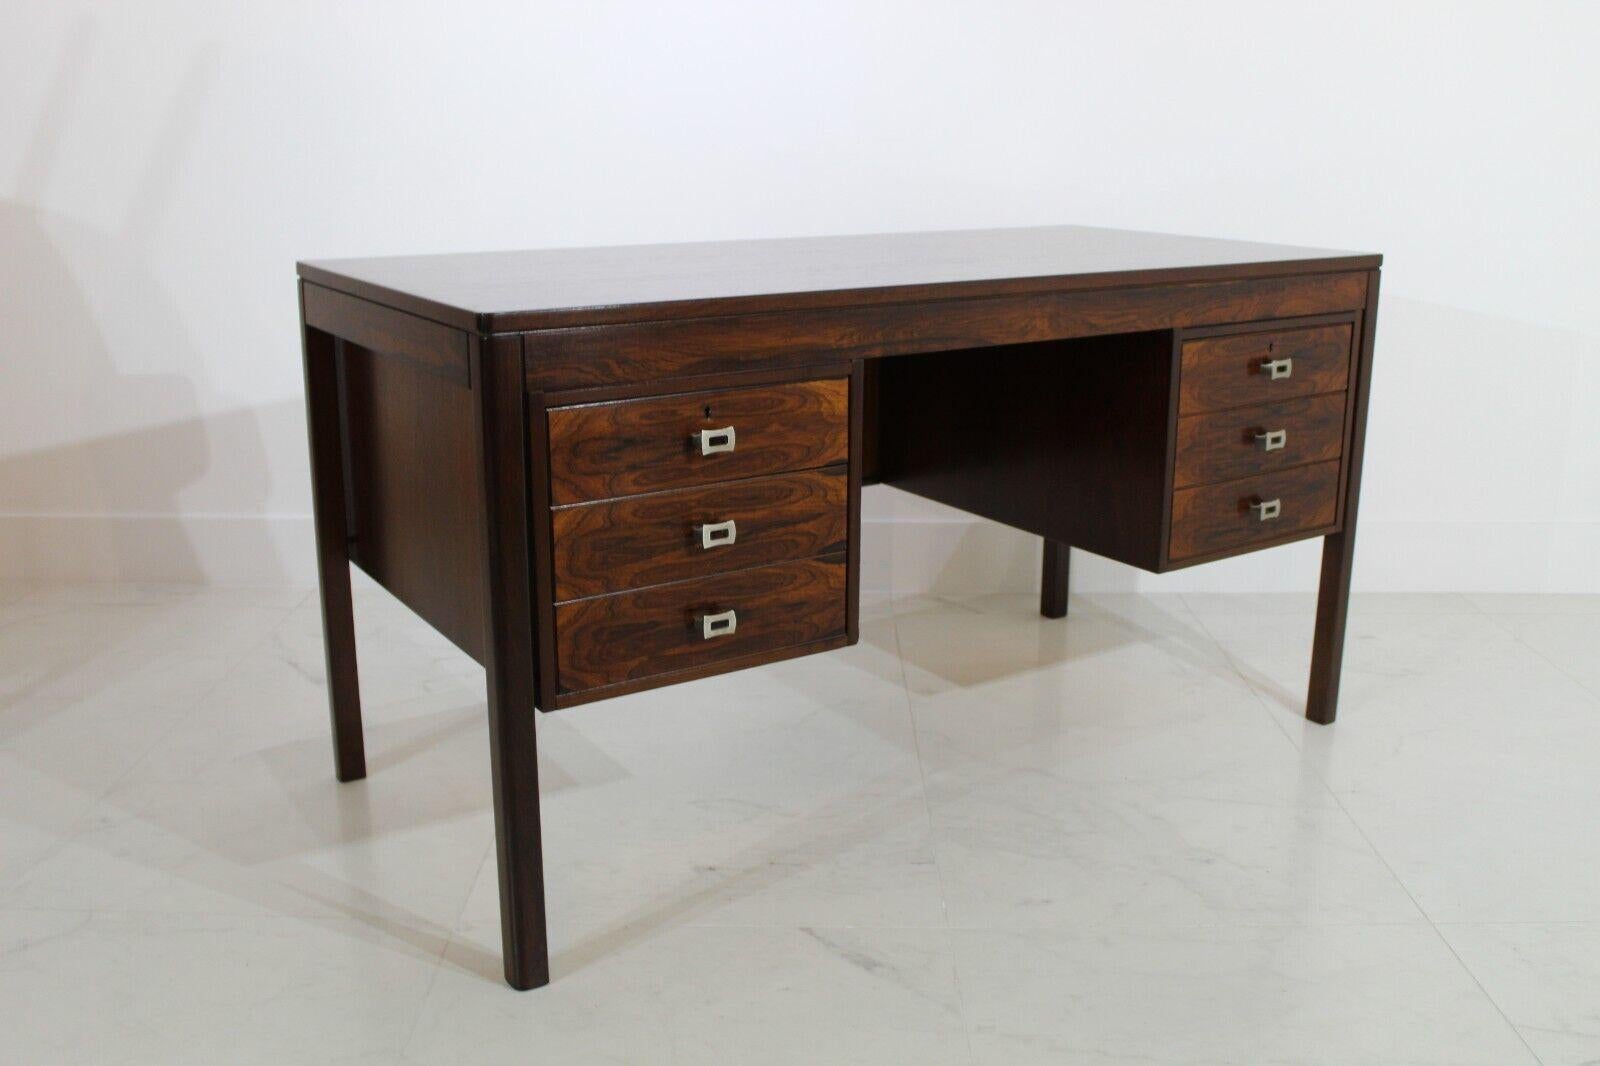 Rosewood Danish 1960's Desk with metal square brushed chrome handles set over 6 drawers.

Beautiful desk boasting a striking Rosewood grain, this piece has been newly re polished.